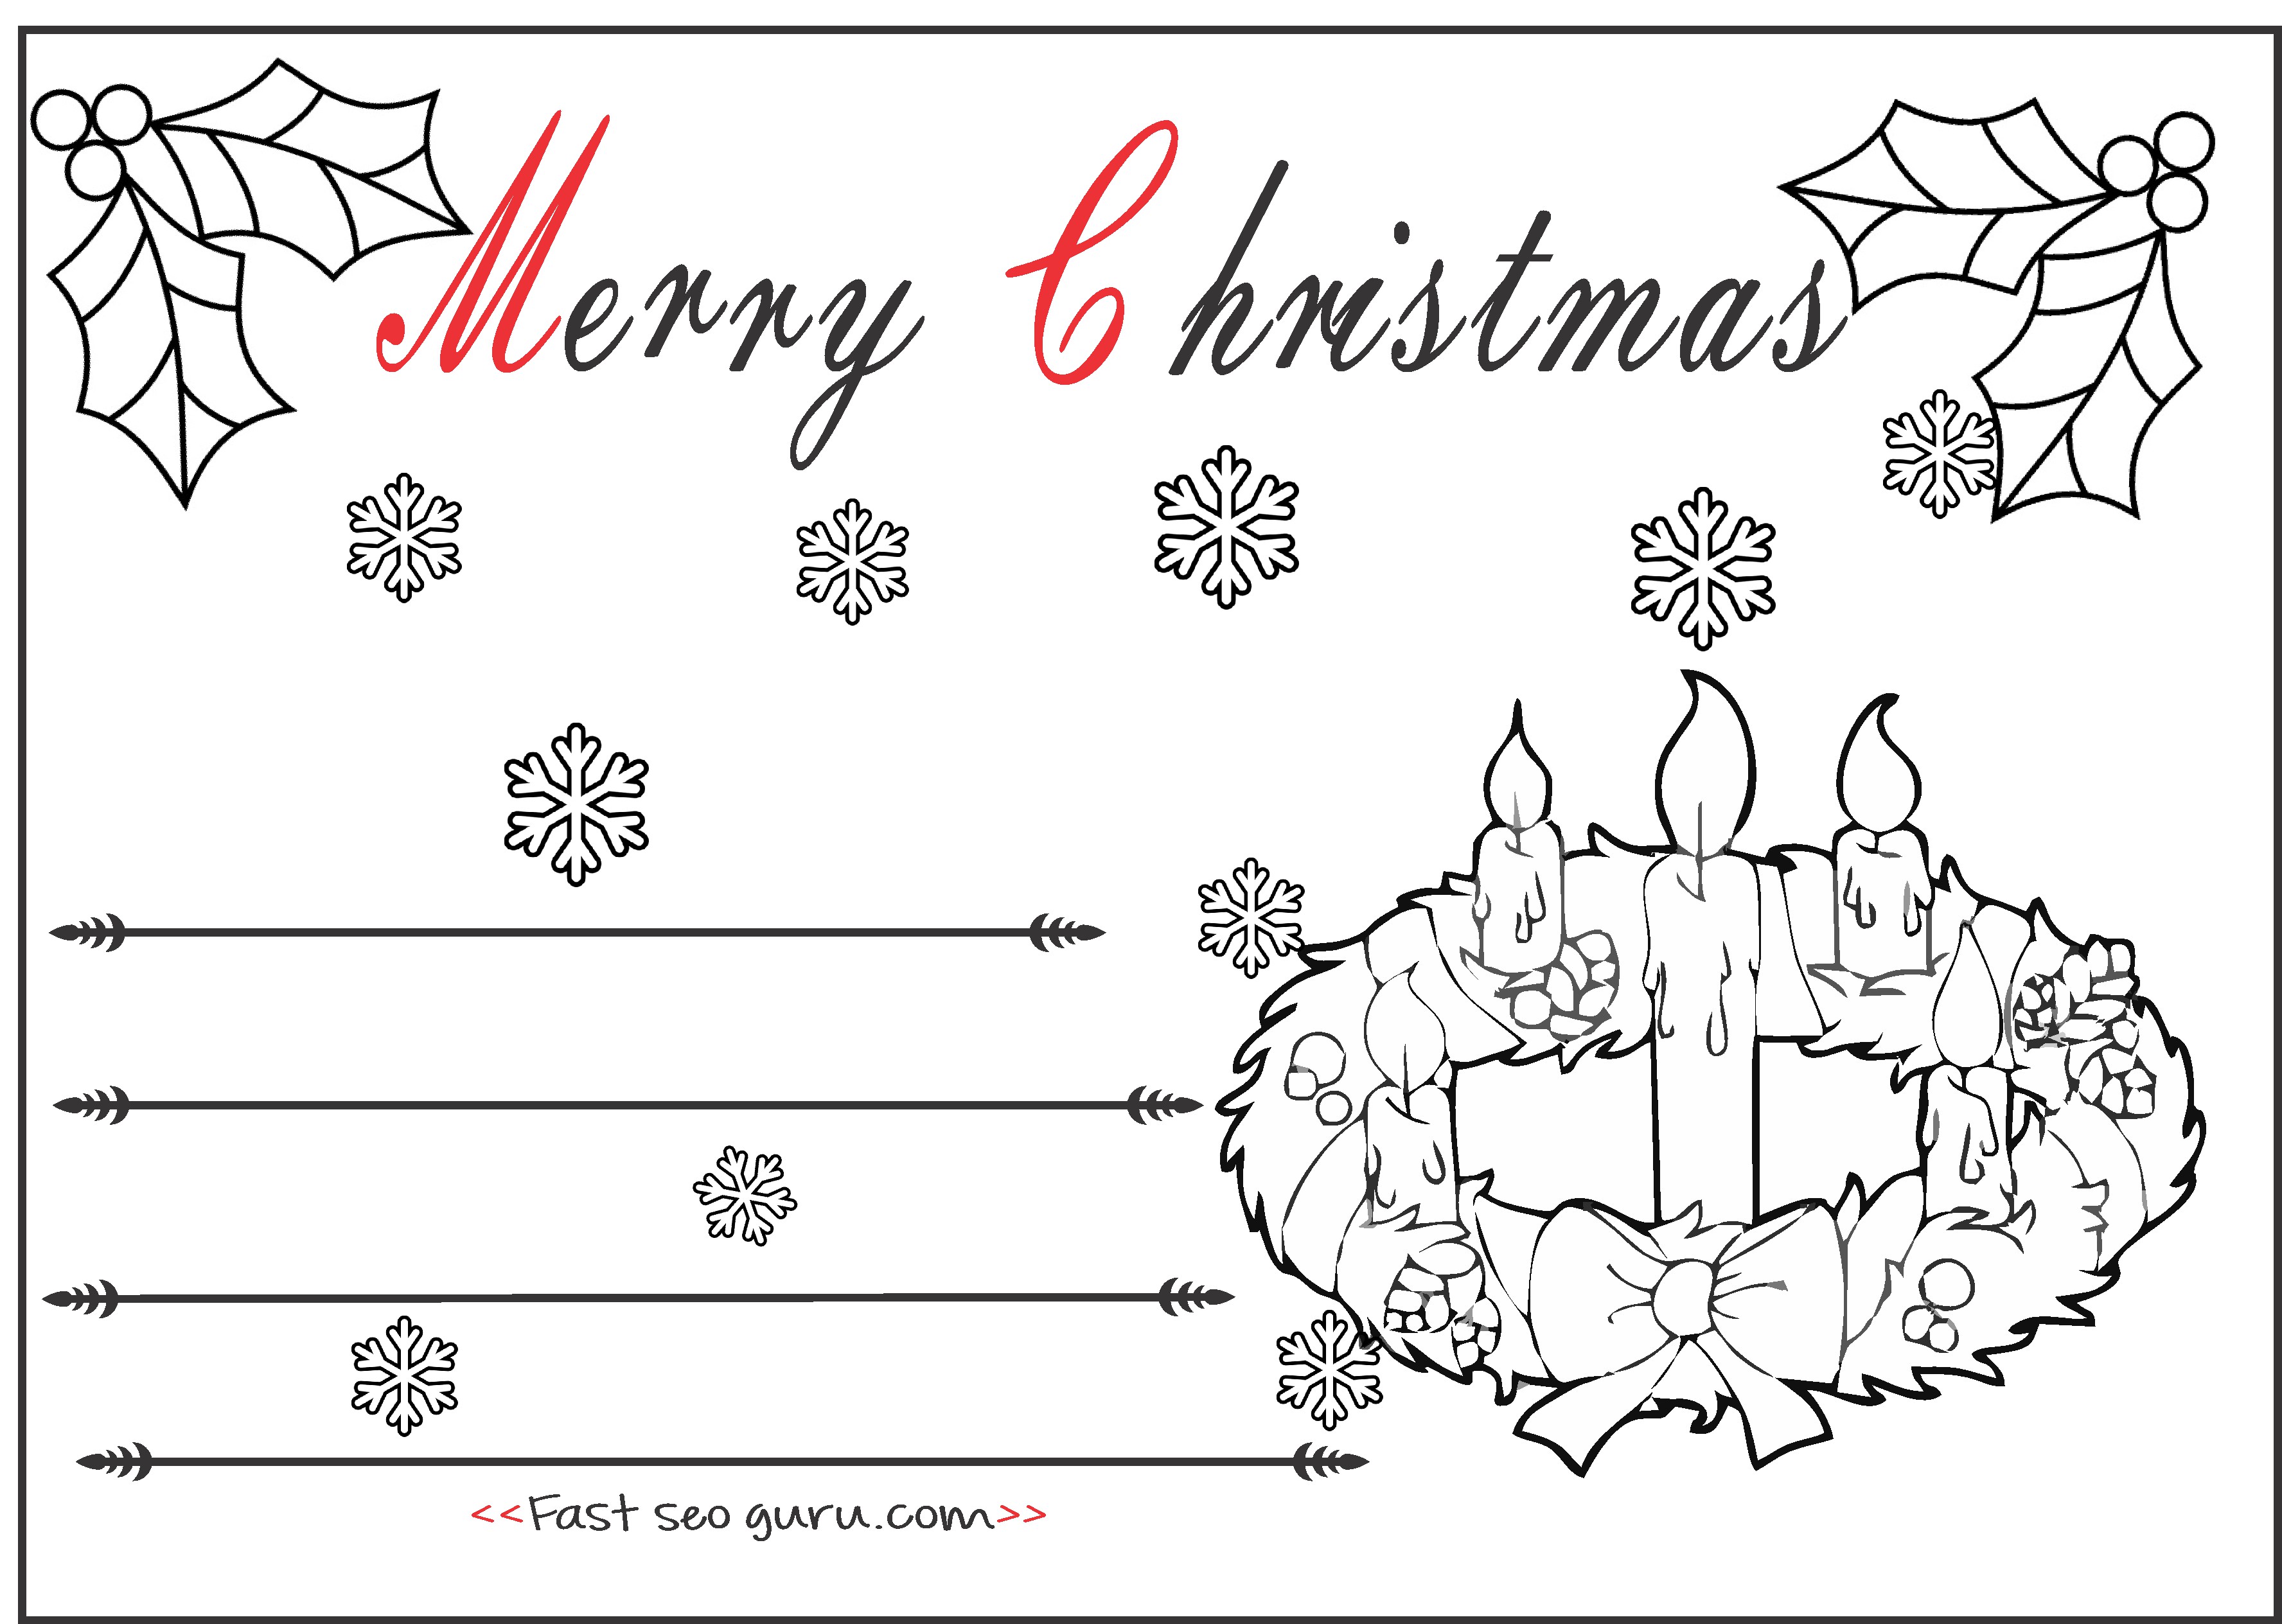 kids christmas advent wreath candles cards to color in